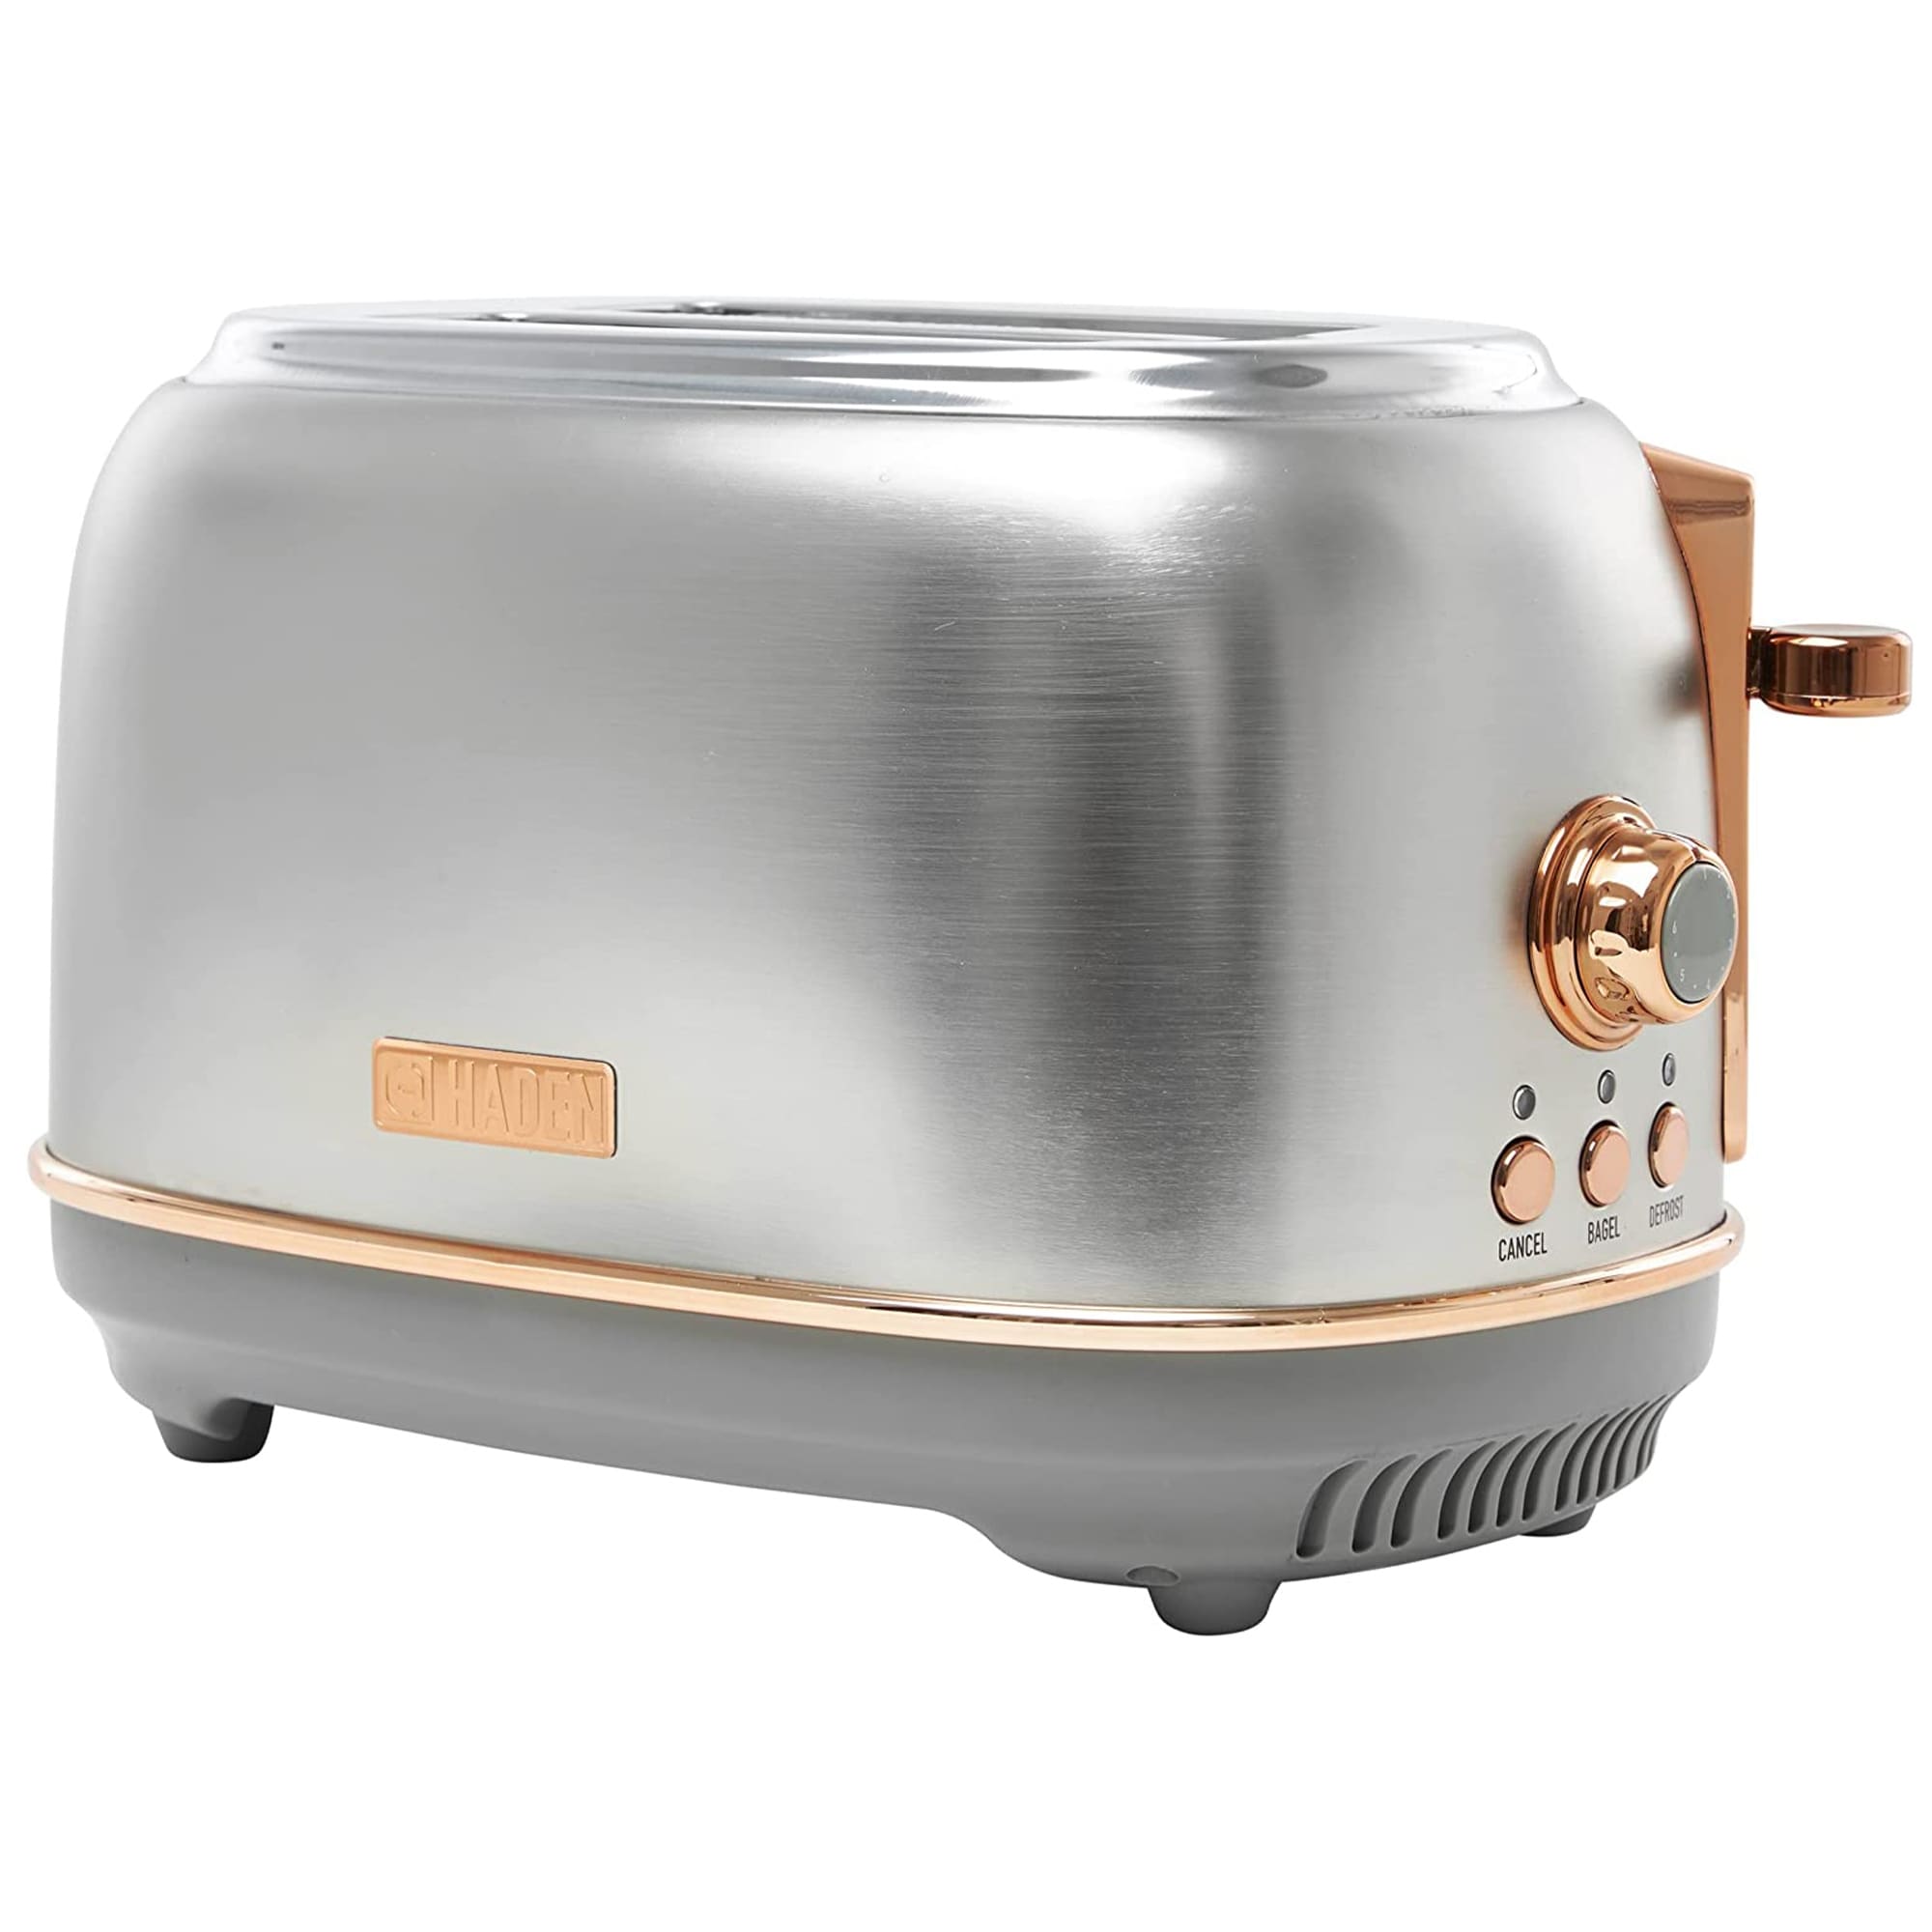 https://ak1.ostkcdn.com/images/products/is/images/direct/bc4ad0dfc0b013fbf601ae399f619dfb22a83187/Haden-Heritage-2-Slice-Wide-Slot-Toaster-with-Removable-Crumb-Tray%2C-Steel-Copper.jpg